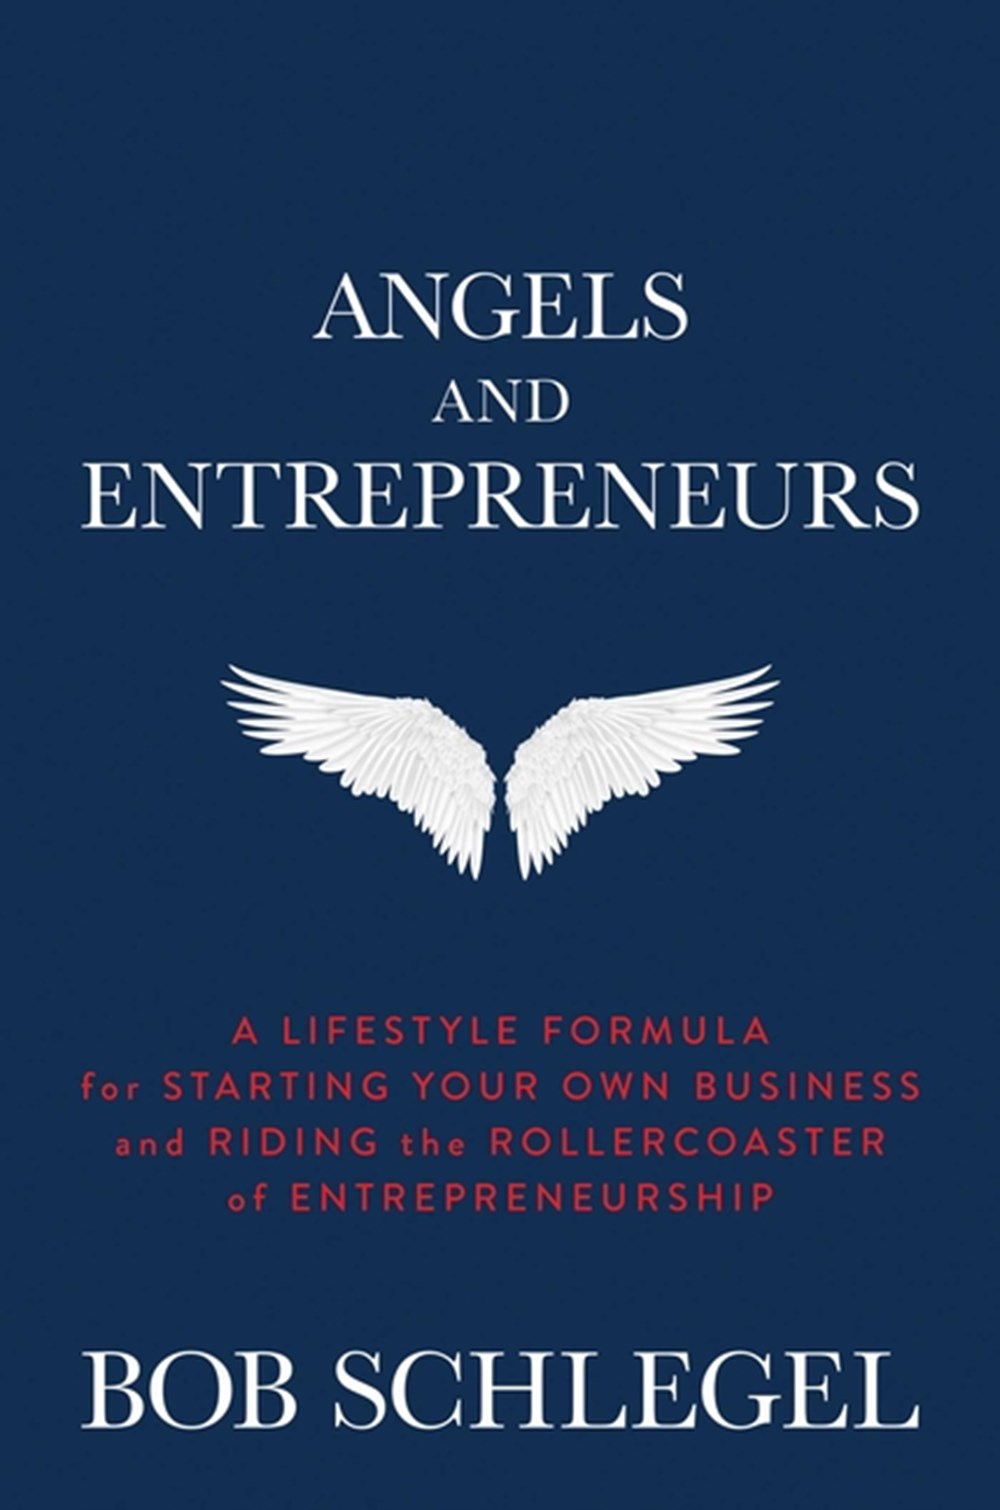 Angels and Entrepreneurs: A Lifestyle Formula for Starting Your Own Business and Riding the Rollerco